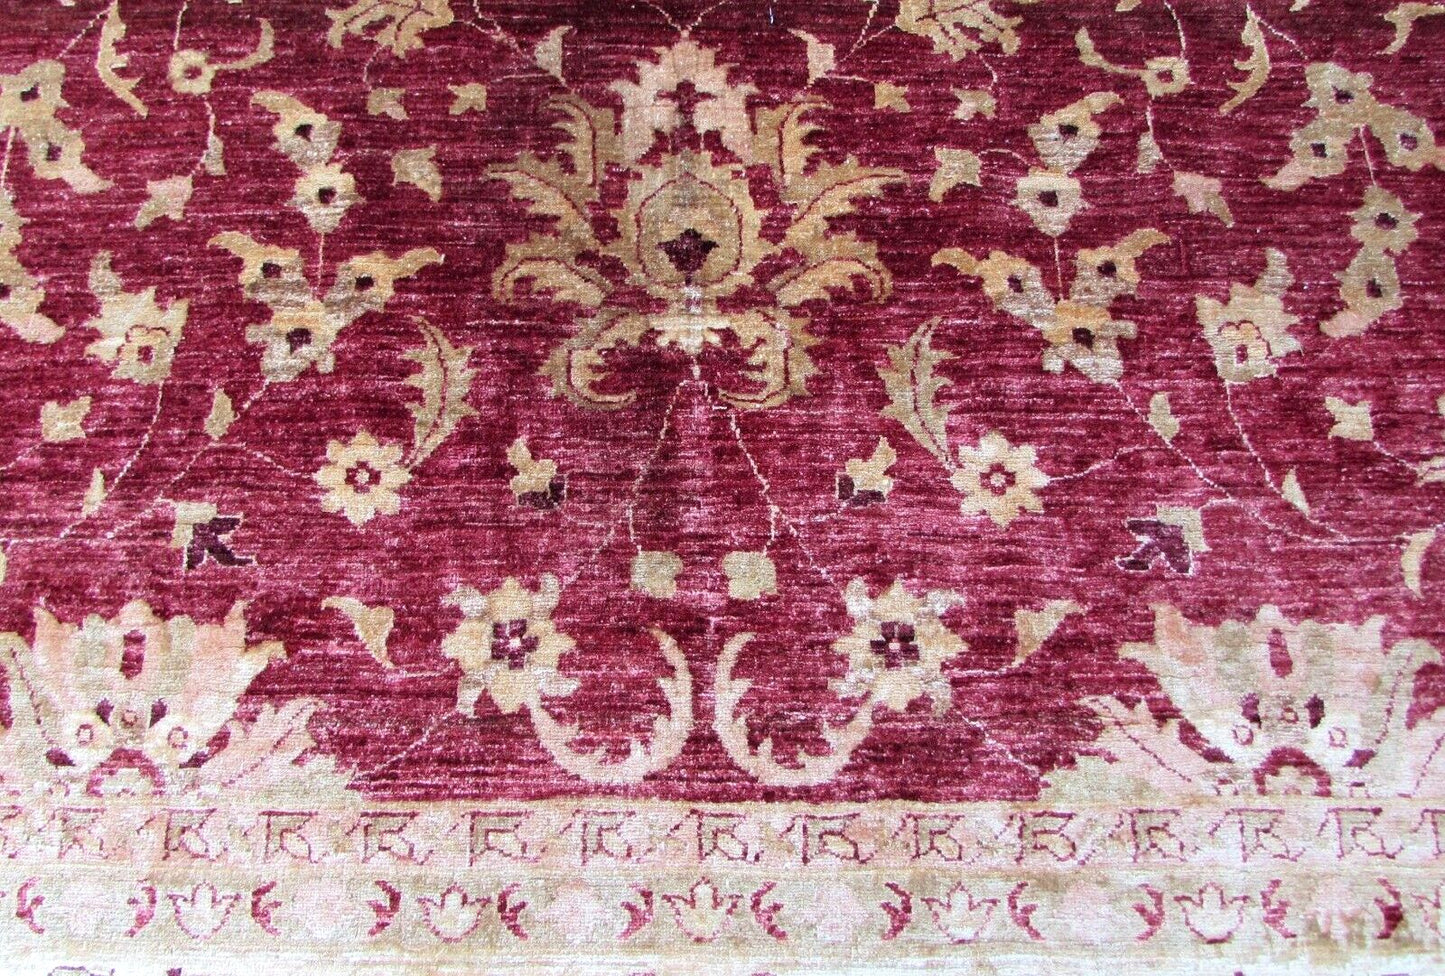 Intricate stitching of the rug's edges and corners